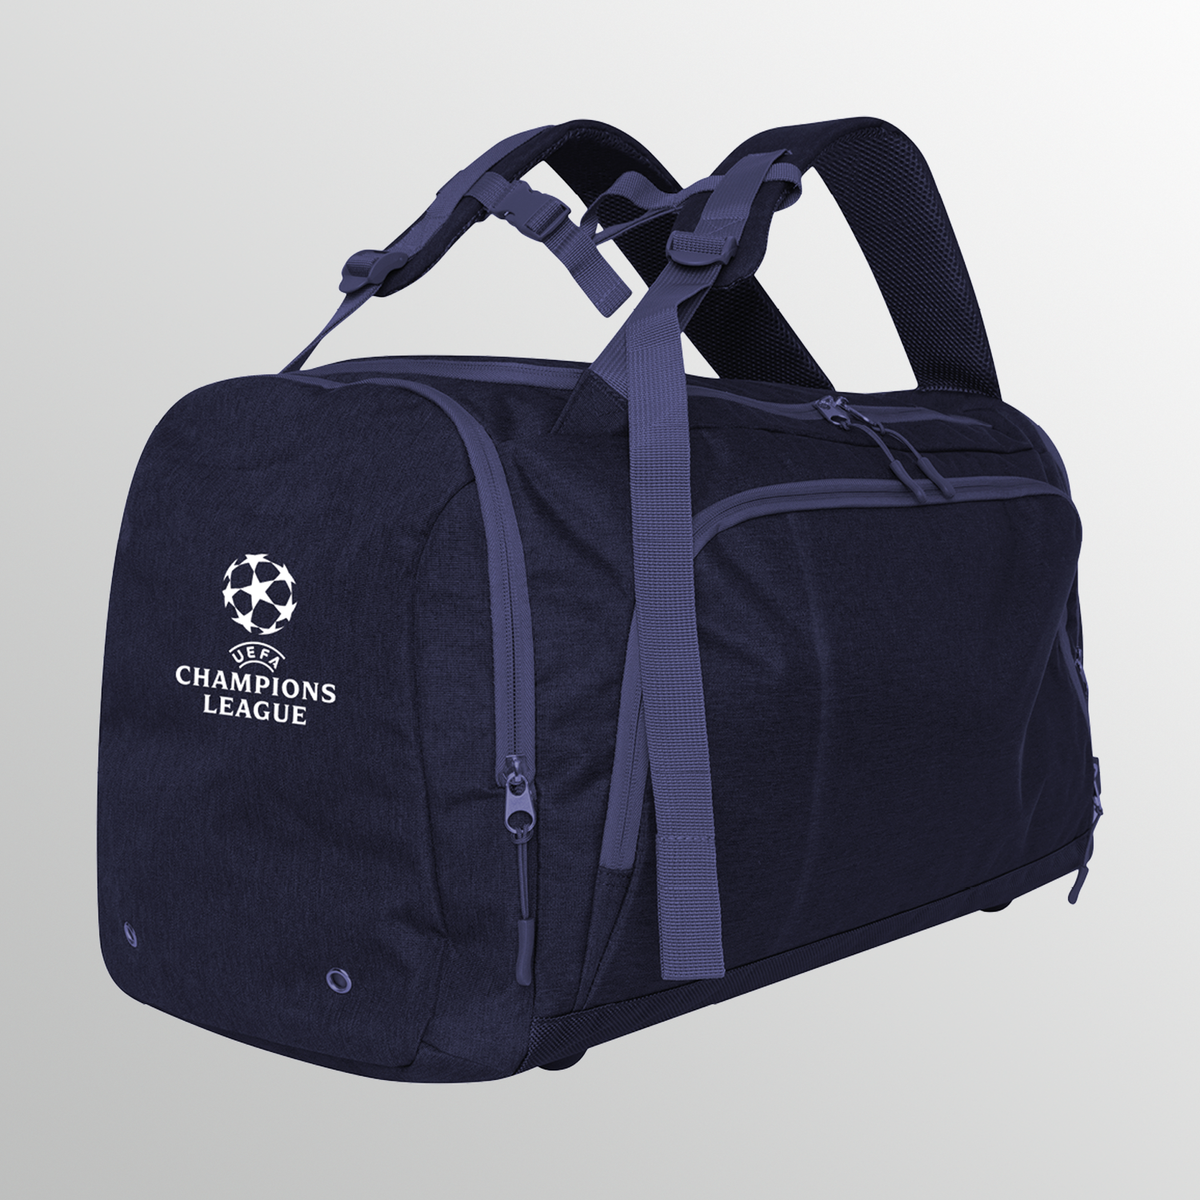 UEFA Champions League Premium Eco Tech 2 in 1 Bag - Backpack &amp; Holdall